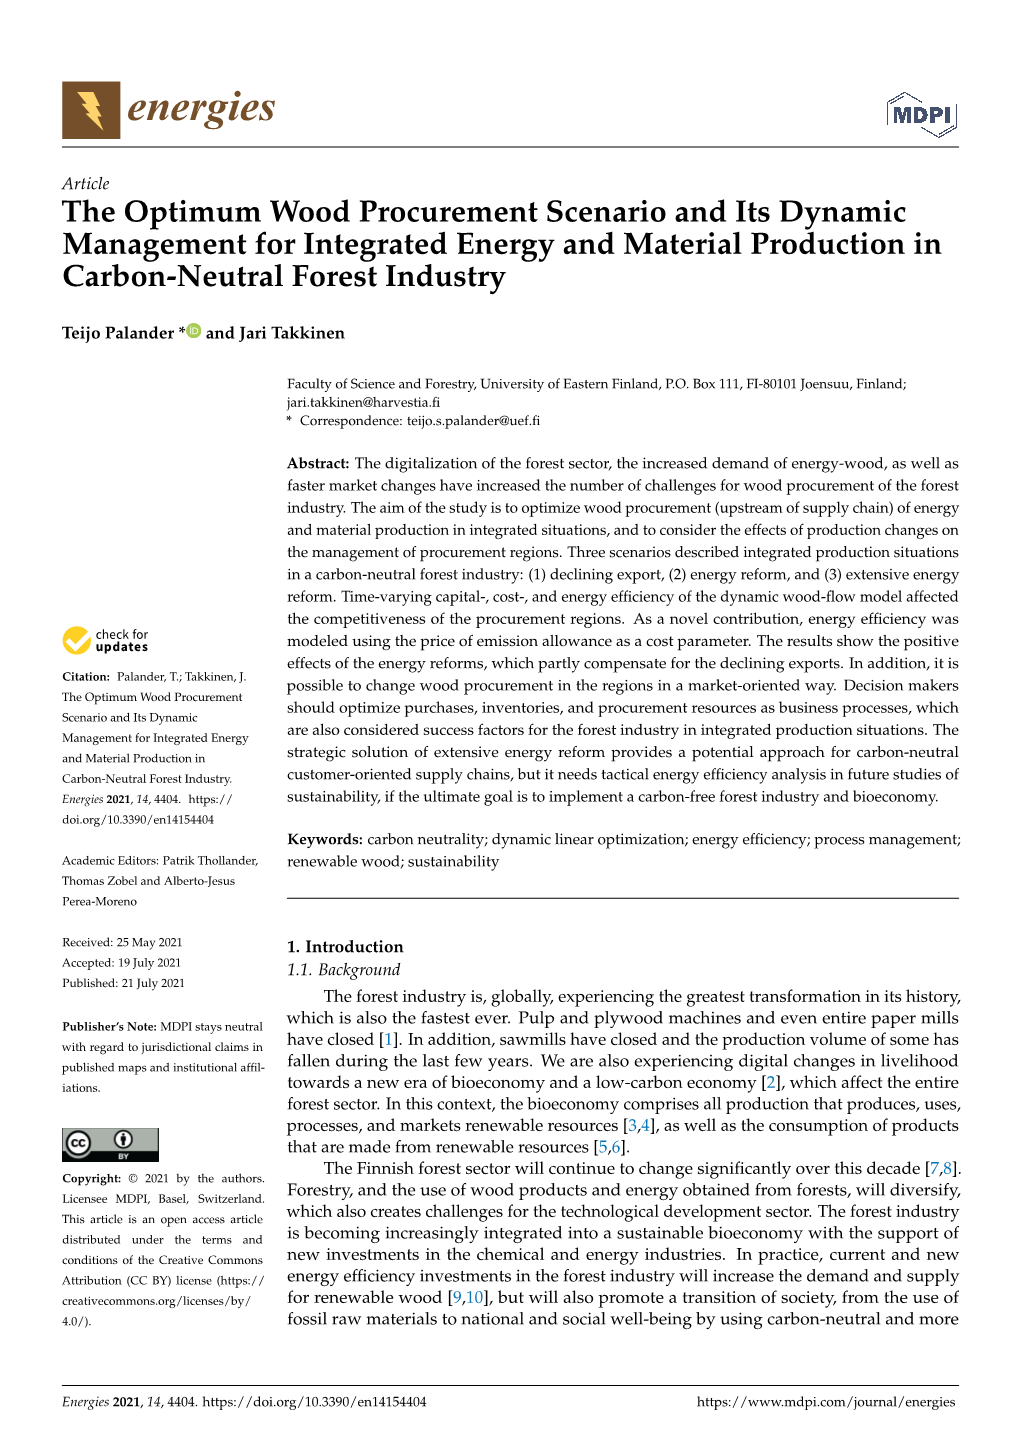 The Optimum Wood Procurement Scenario and Its Dynamic Management for Integrated Energy and Material Production in Carbon-Neutral Forest Industry